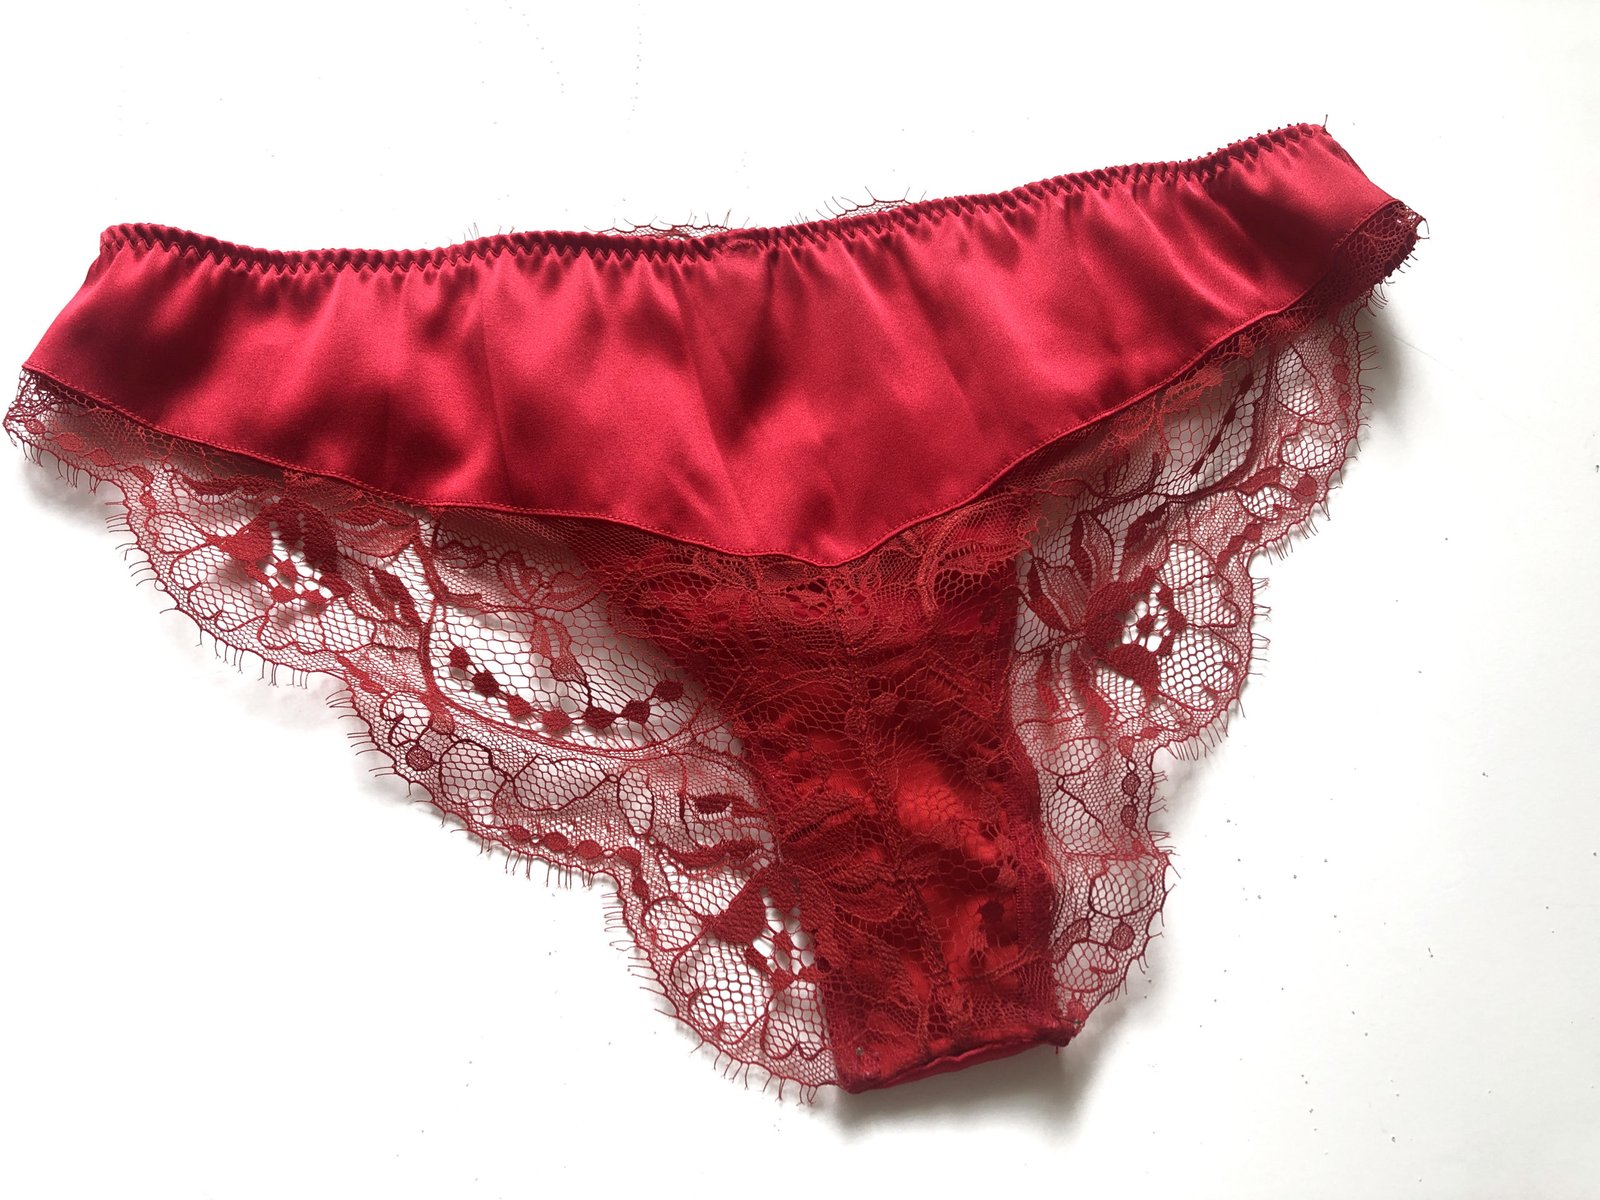 Photo of Lacy Underwear on Red Silky Fabric